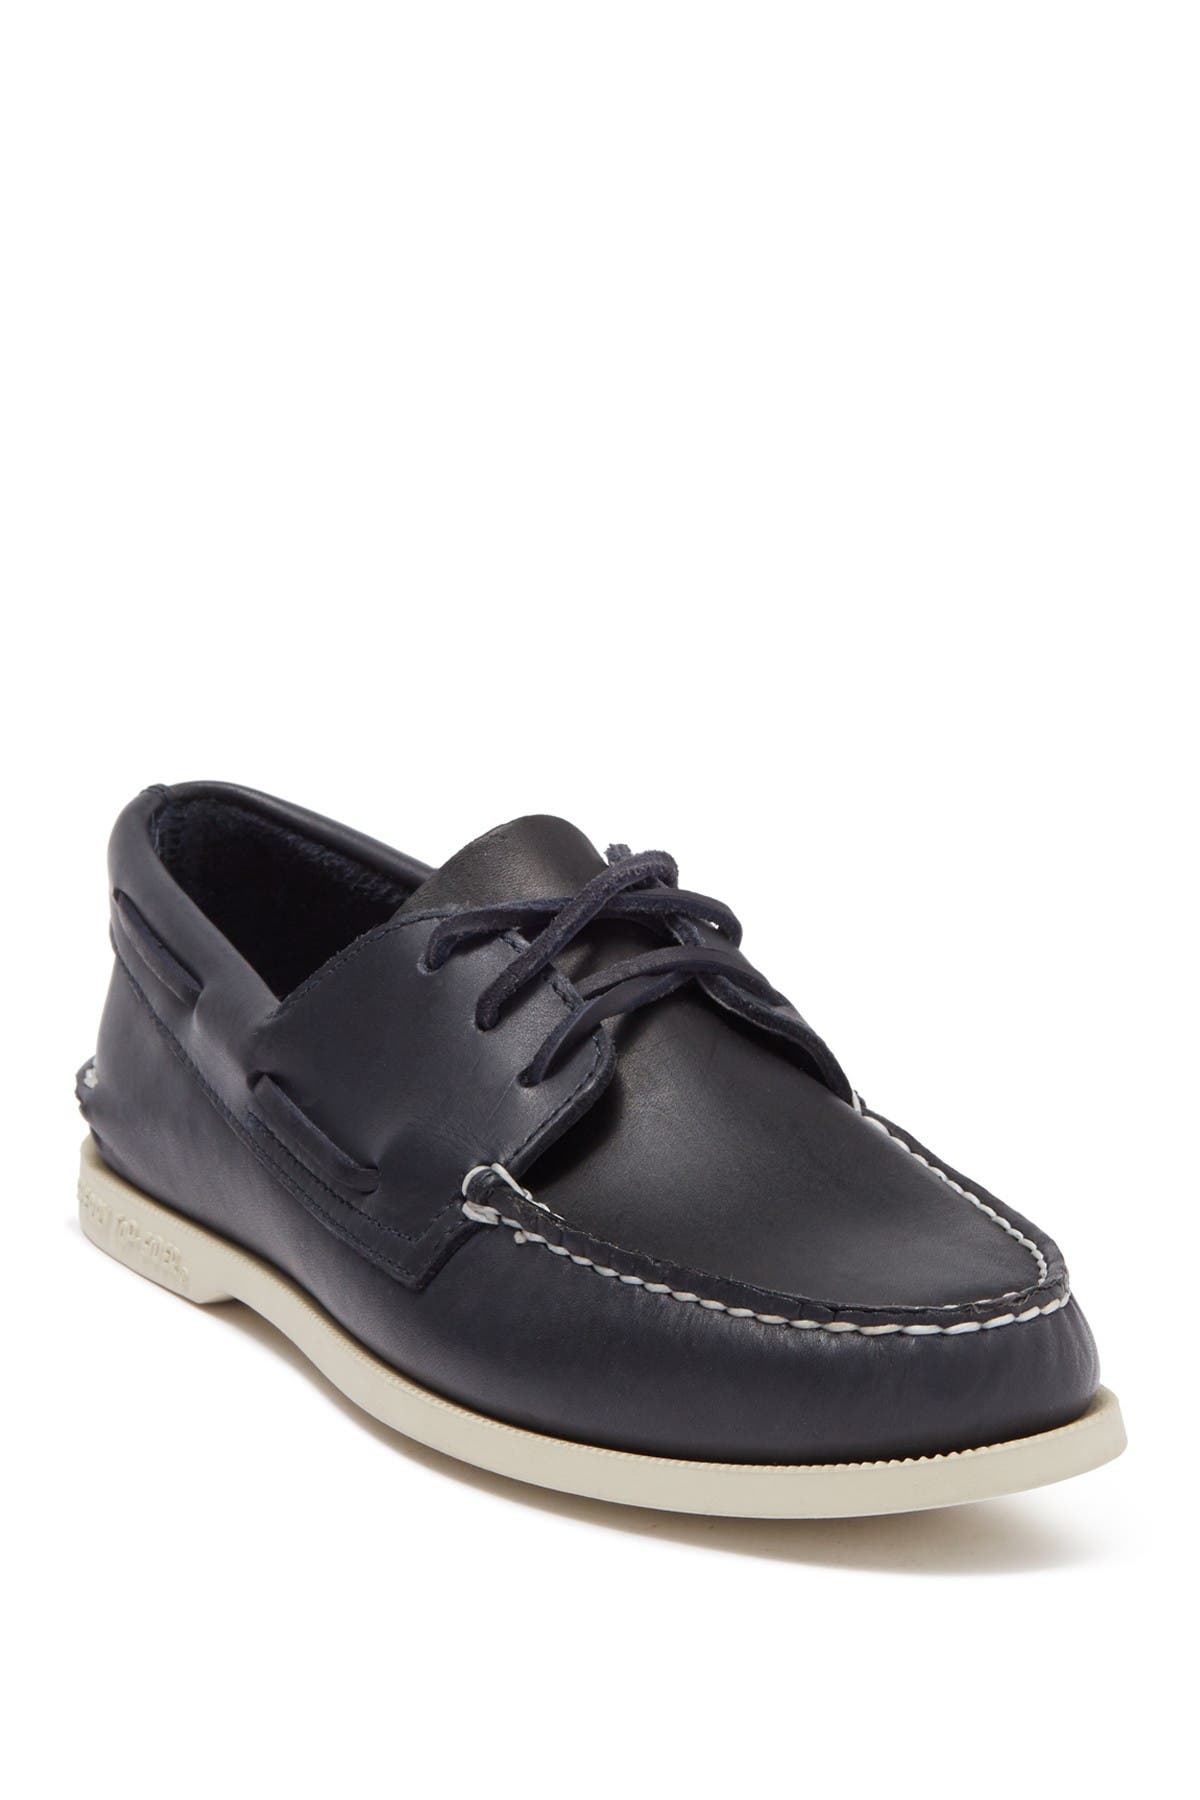 Sperry | Authentic Original 3-Eye Boat 